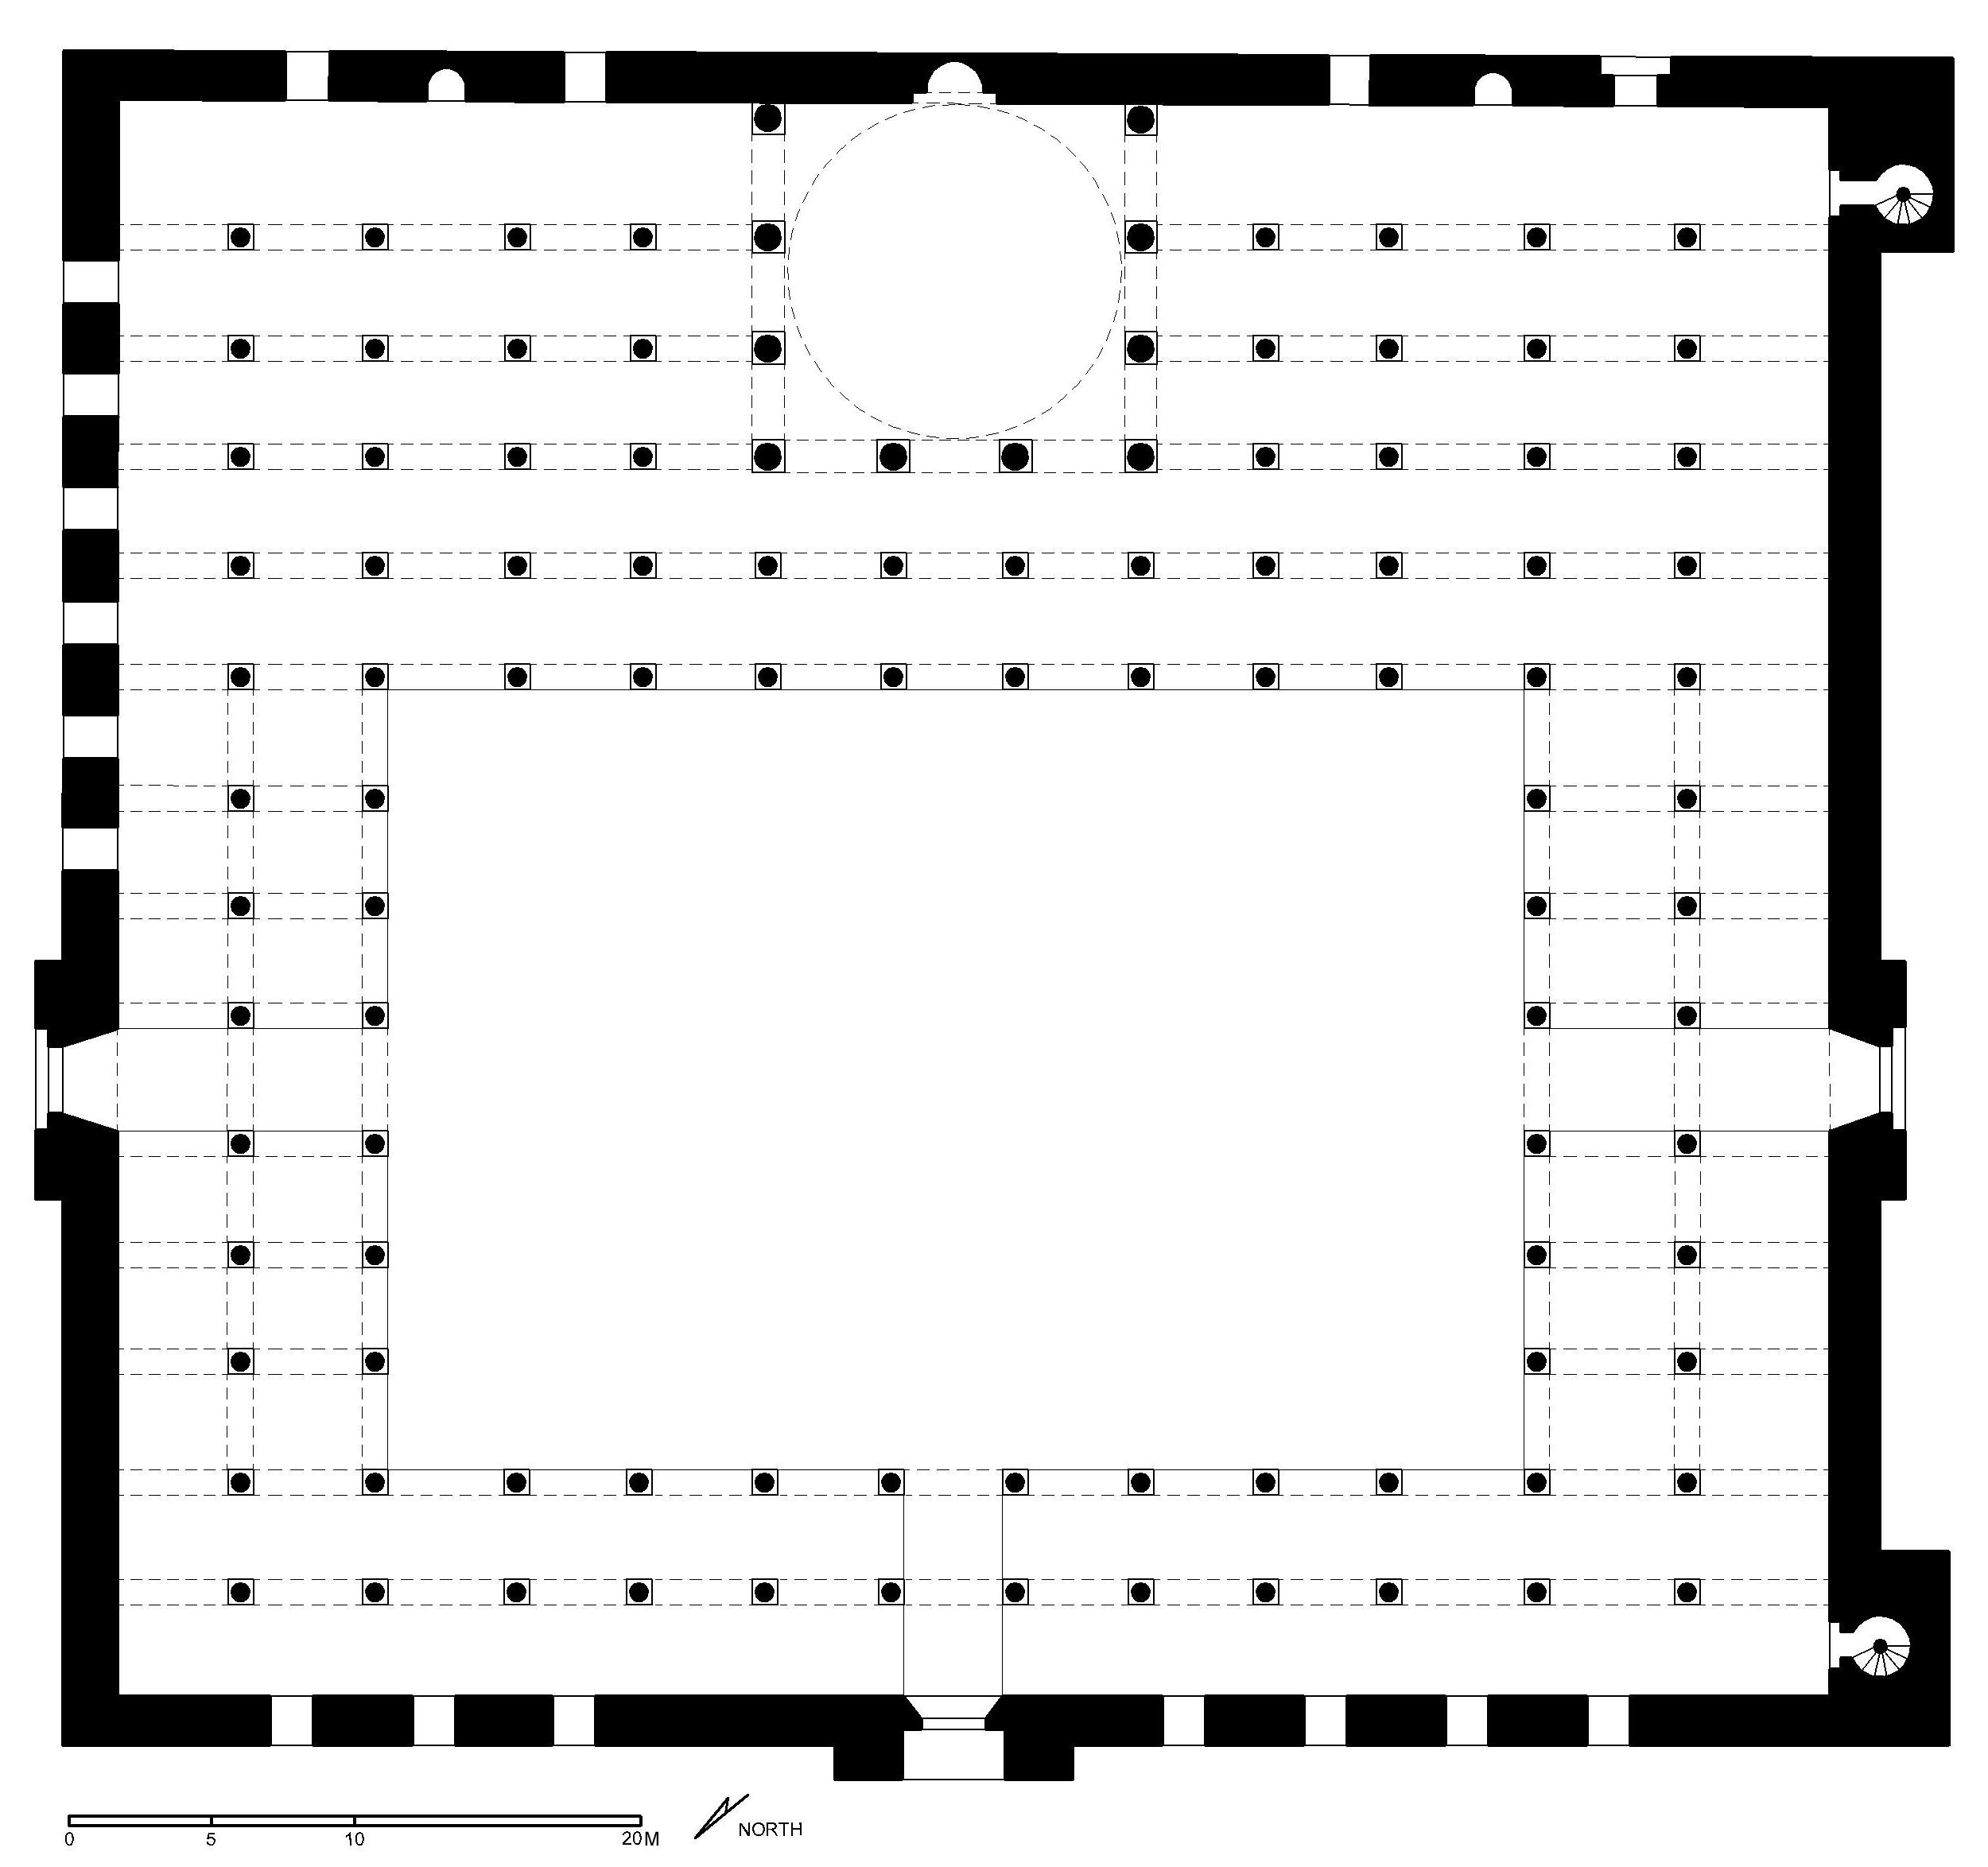 Jami al-Jadid - Reconstituted  floor plan of mosque (after Meinecke) in AutoCAD 2000 format. Click the download button to download a zipped file containing the .dwg file.